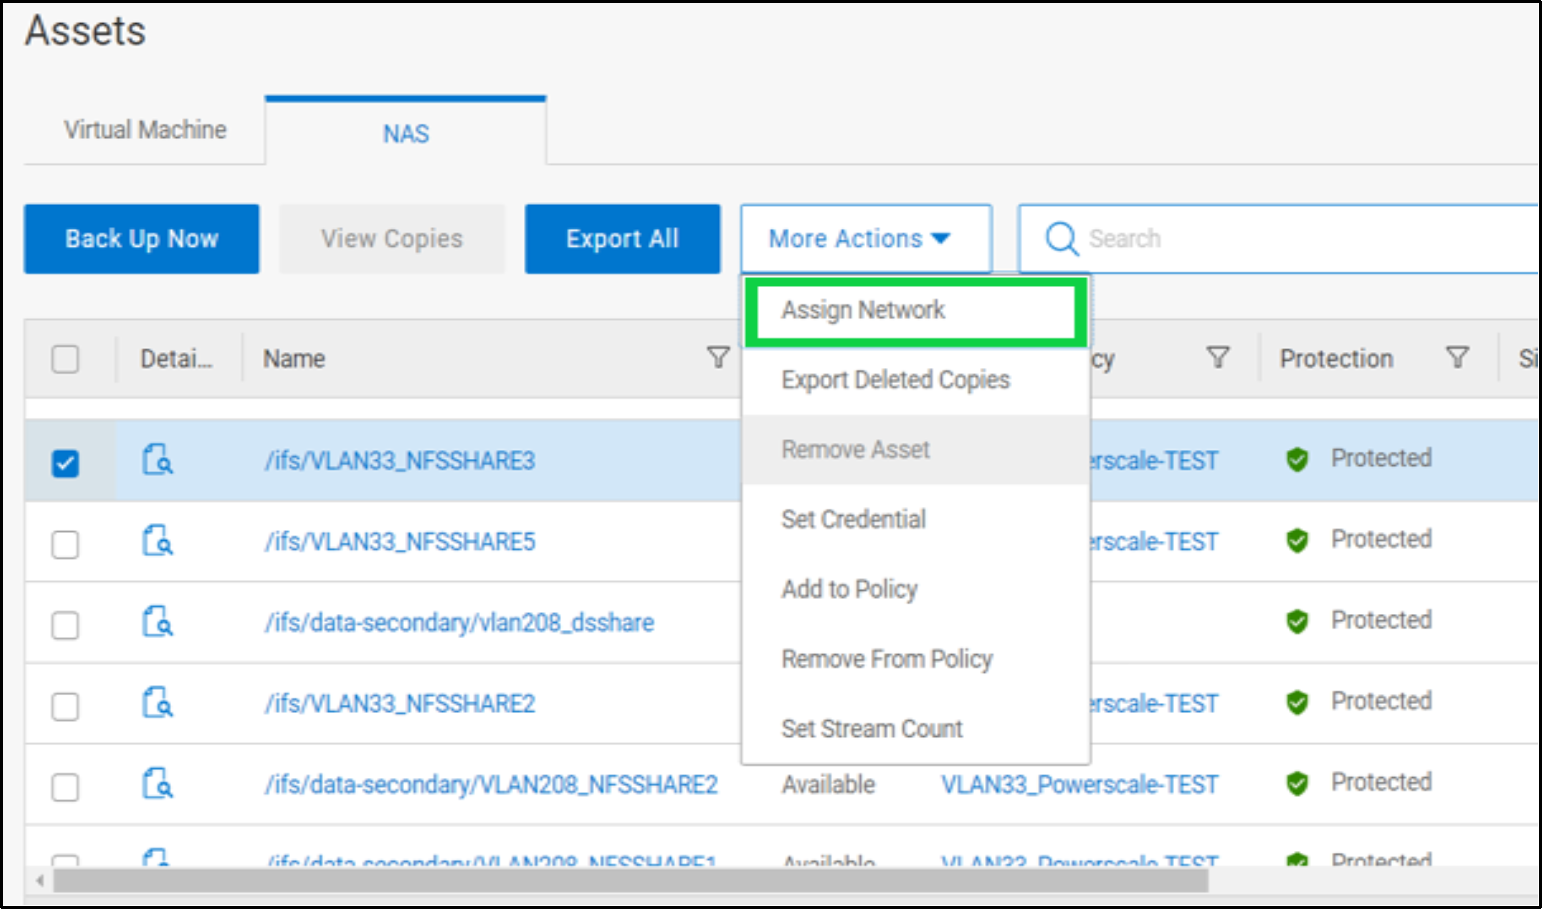 Screenshot of Data manager Assets section showing Assign Network option